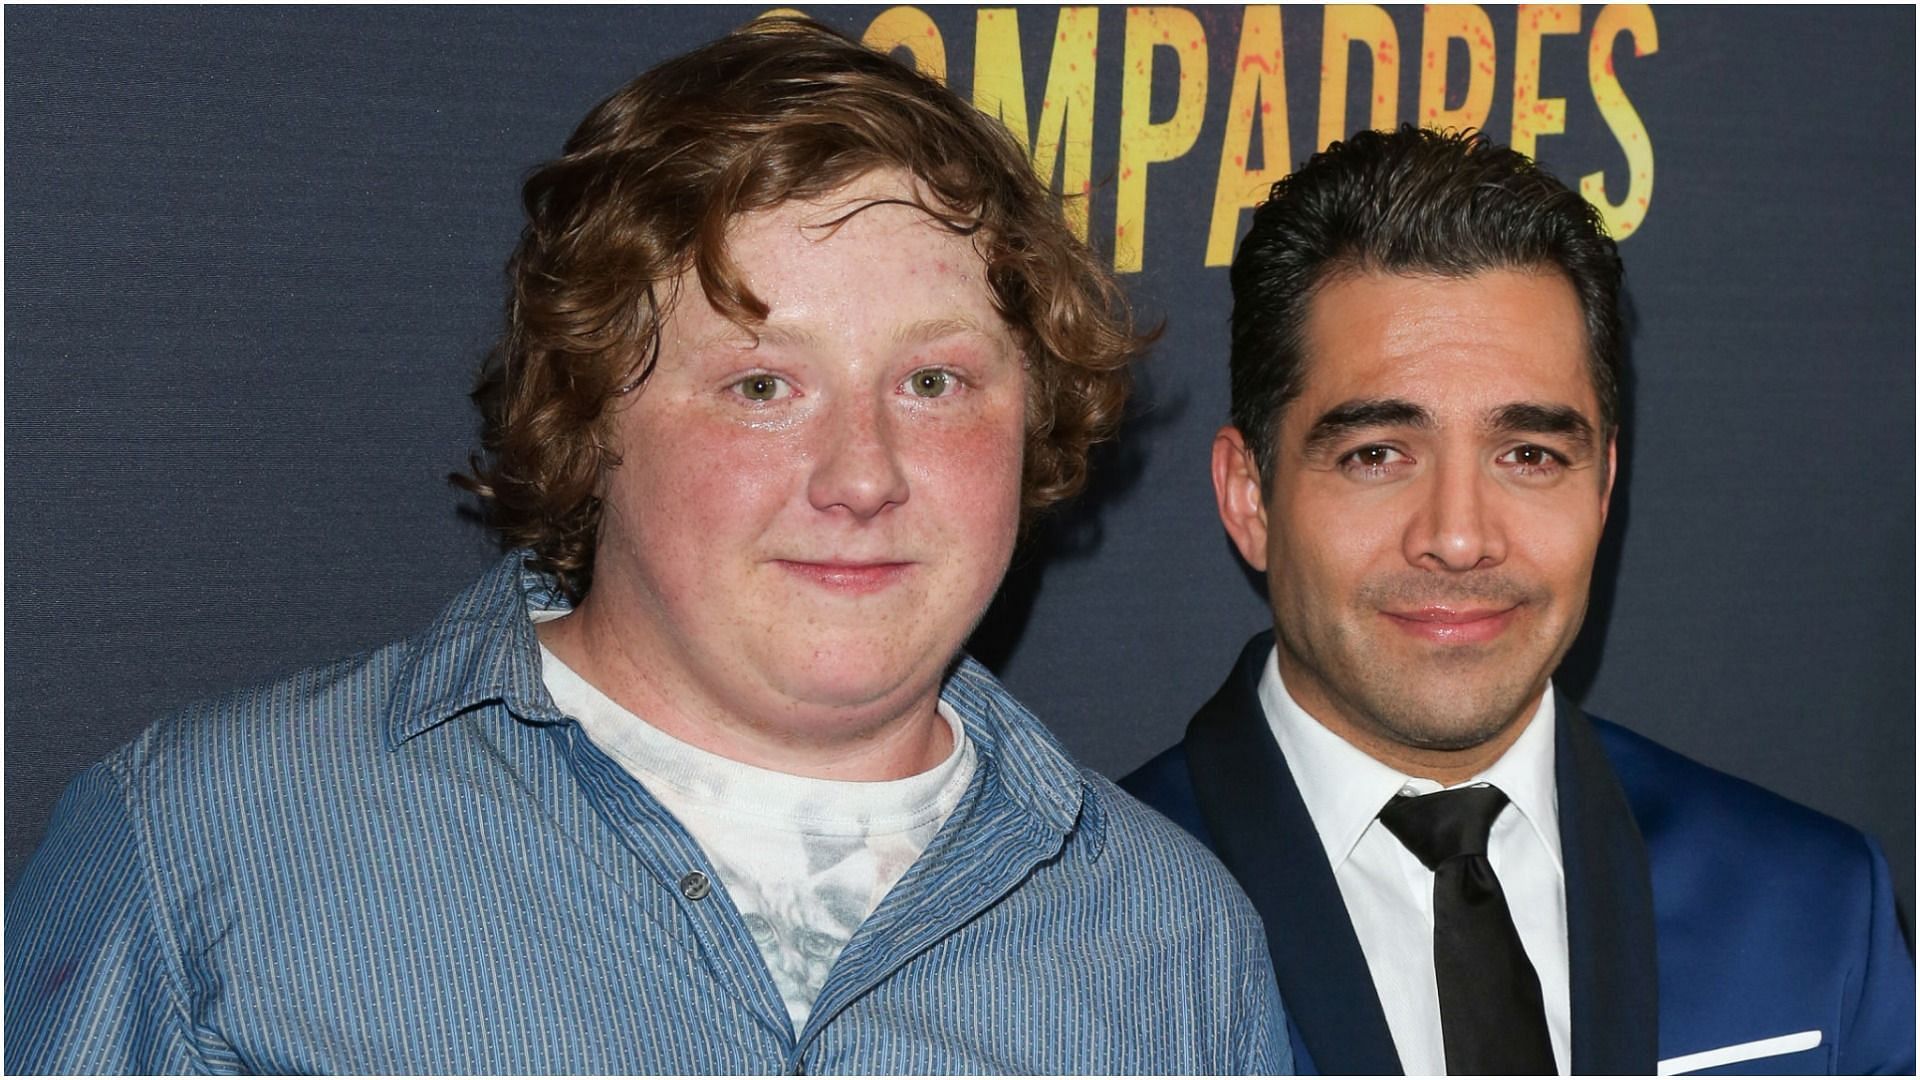 Joey Morgan and Omar Chaparro attend the premiere of Compadres (Image via Getty Images/Paul Archuleta/FilmMagic)